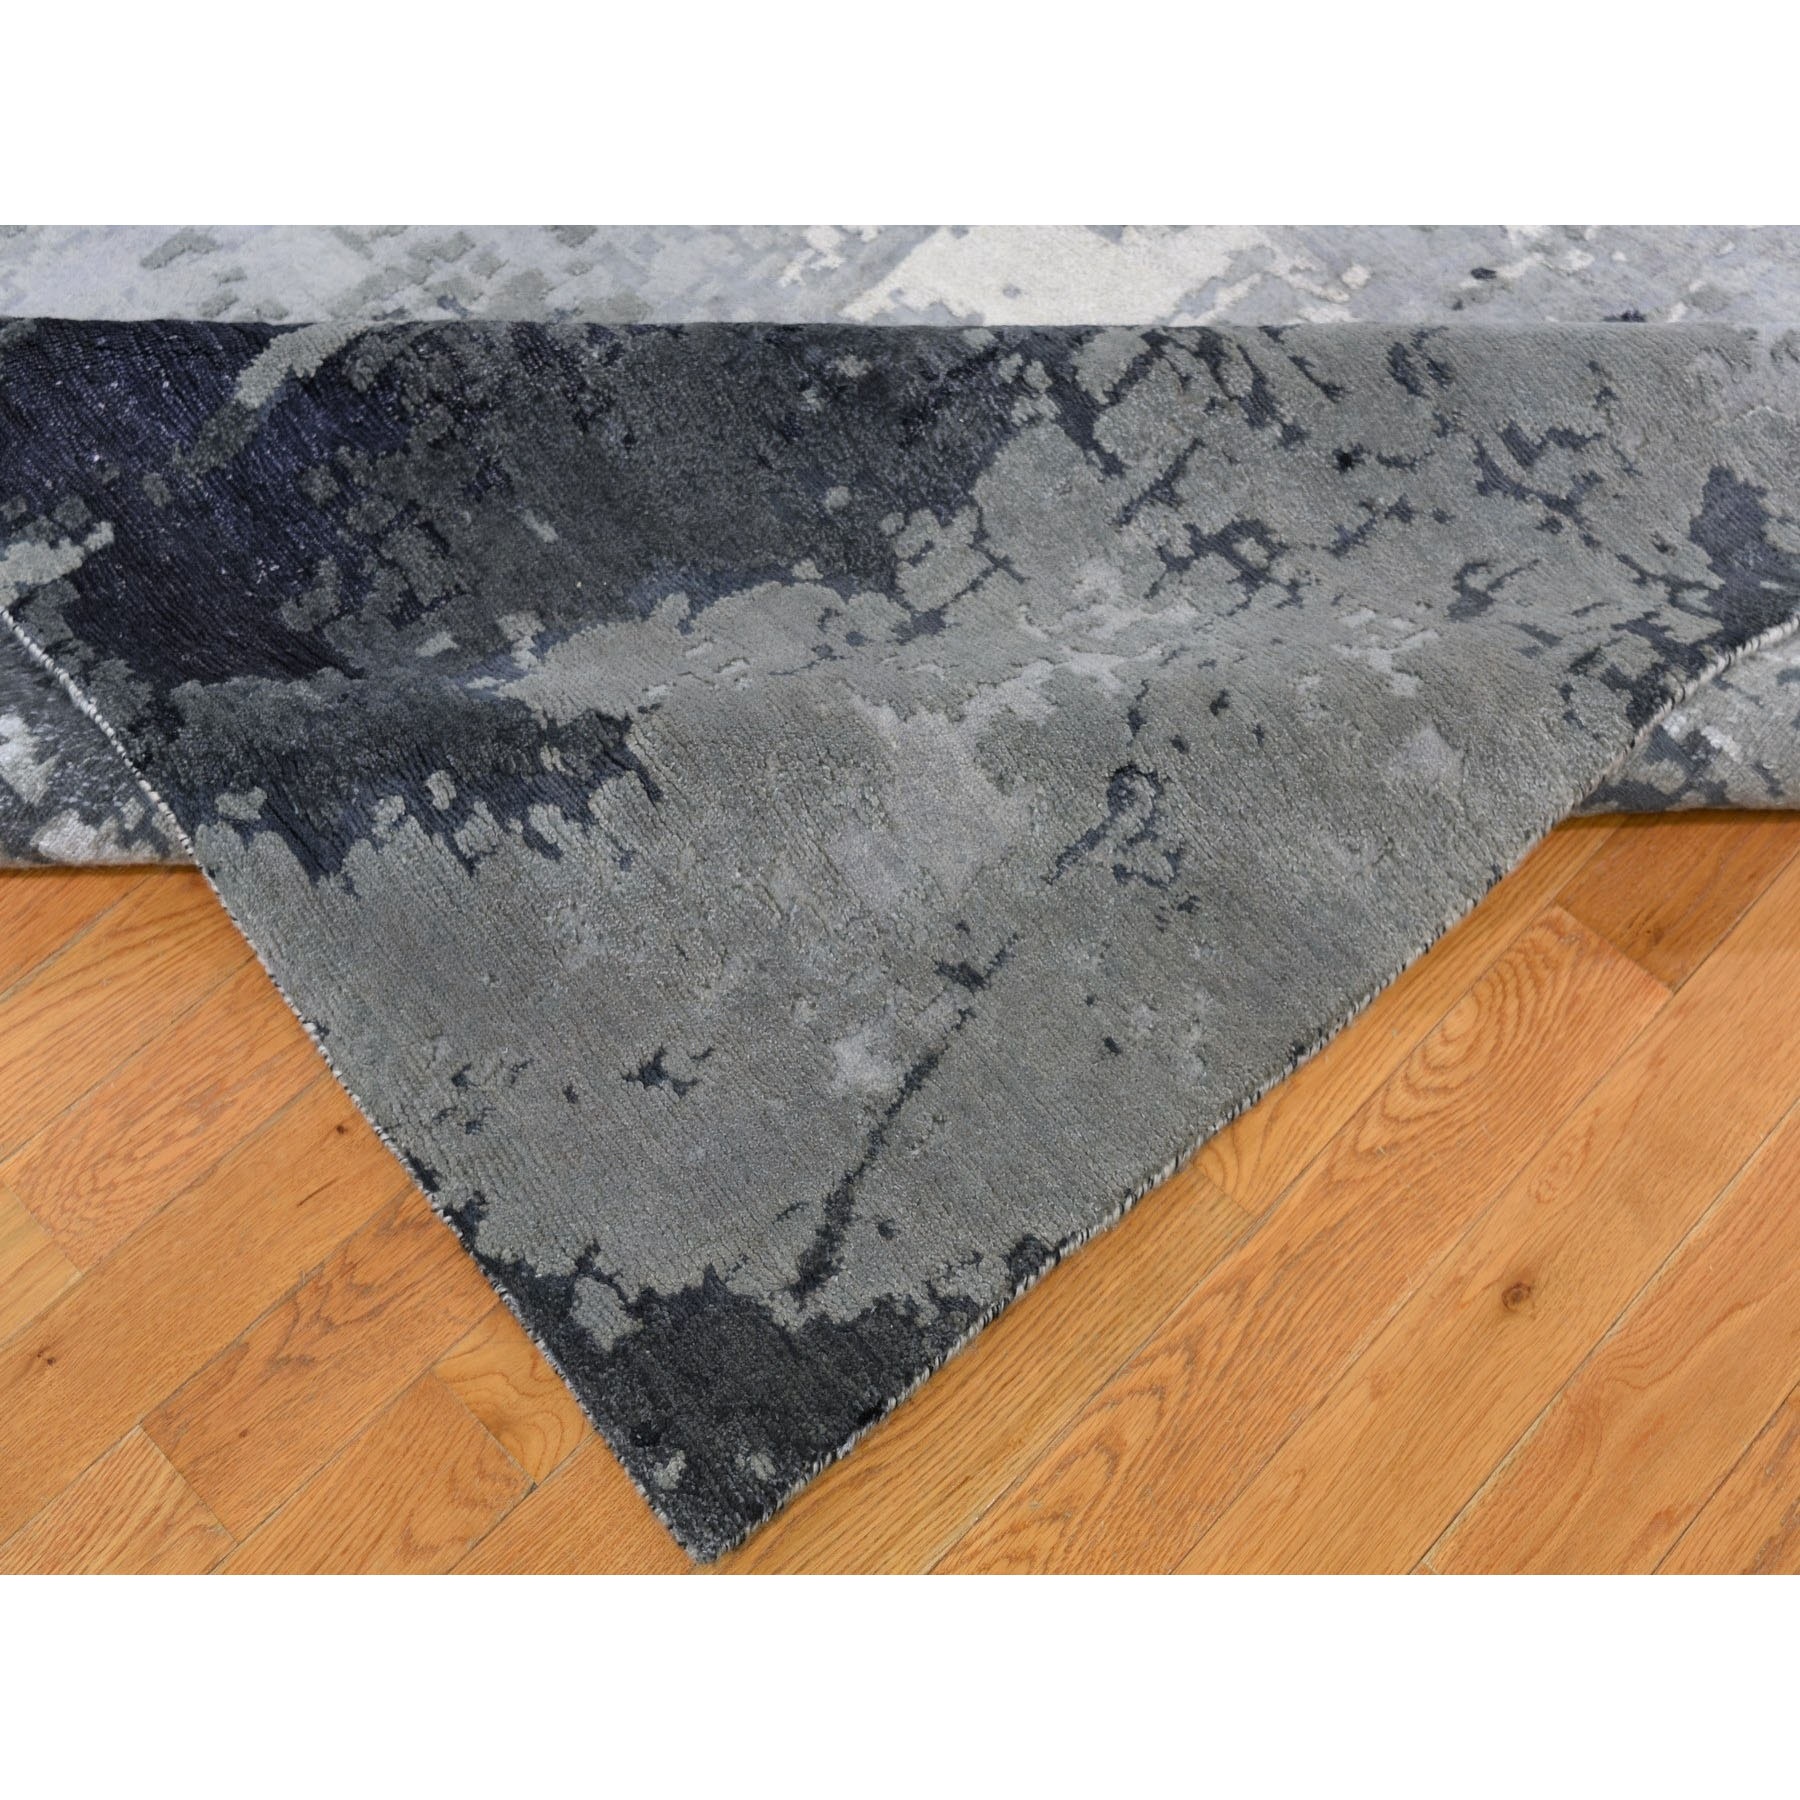 10-x14-2   Gray-Black Abstract Design Wool and Silk Hand Knotted Oriental Rug 